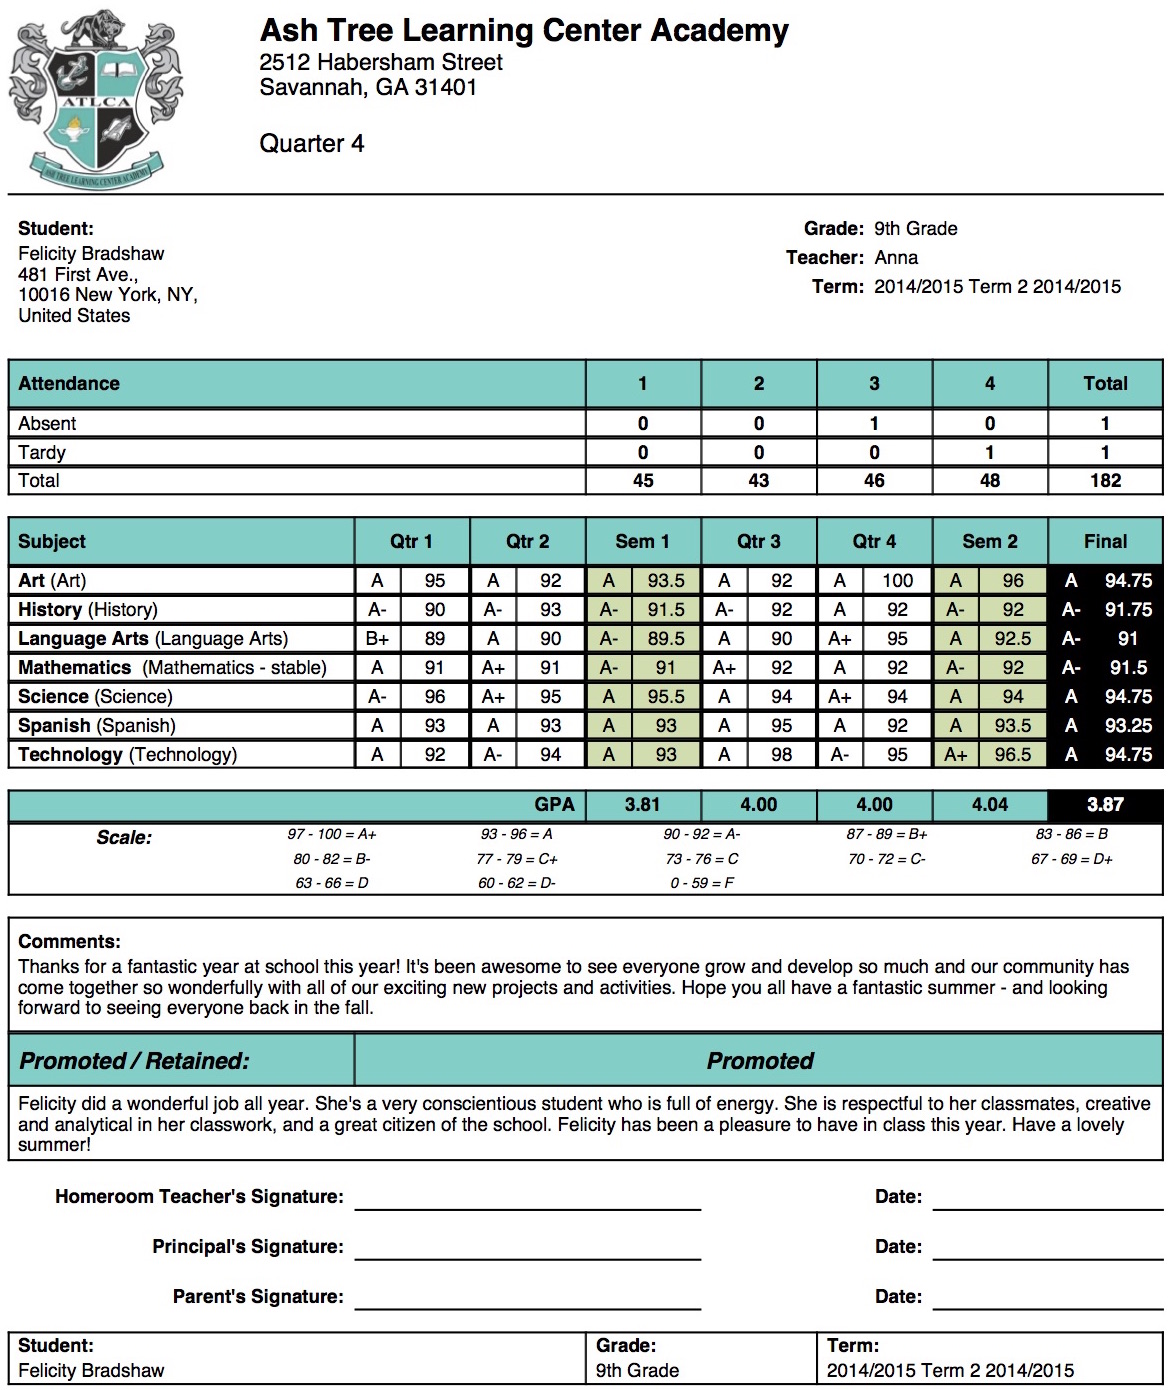 Ash Tree Learning Center Academy Report Card Template | School 